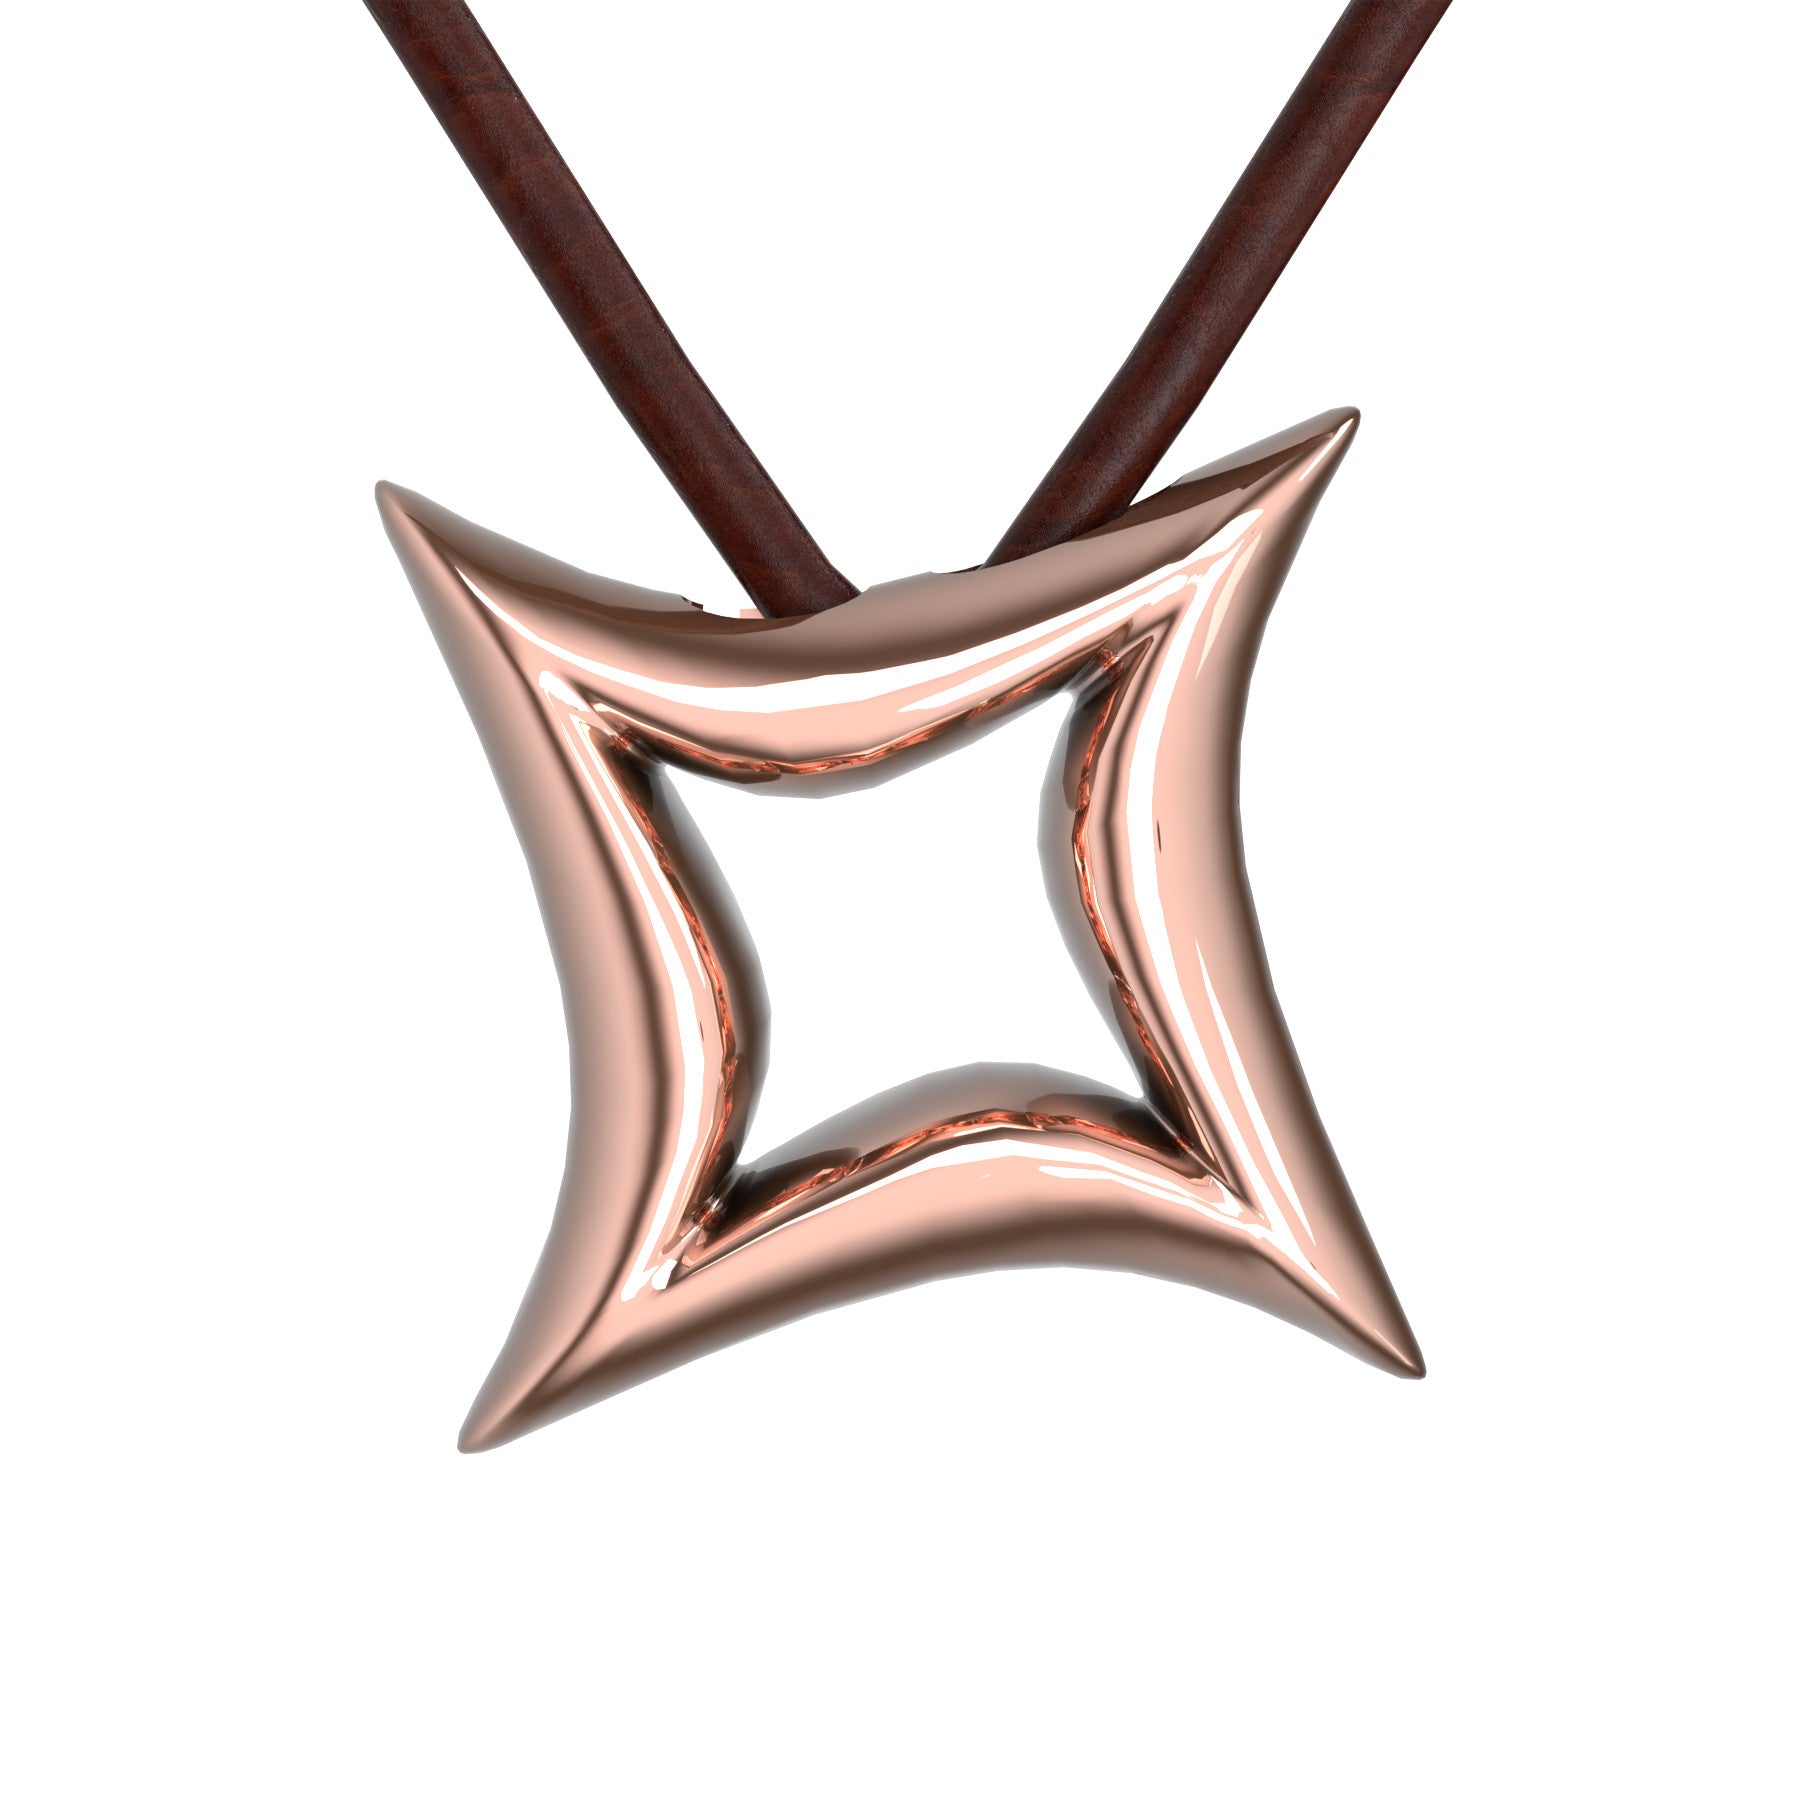 etoile bizarre pendant,18 K pink gold, weight about 7,0 g. (0.24 oz), size 24,3x24,3x5,7 mm